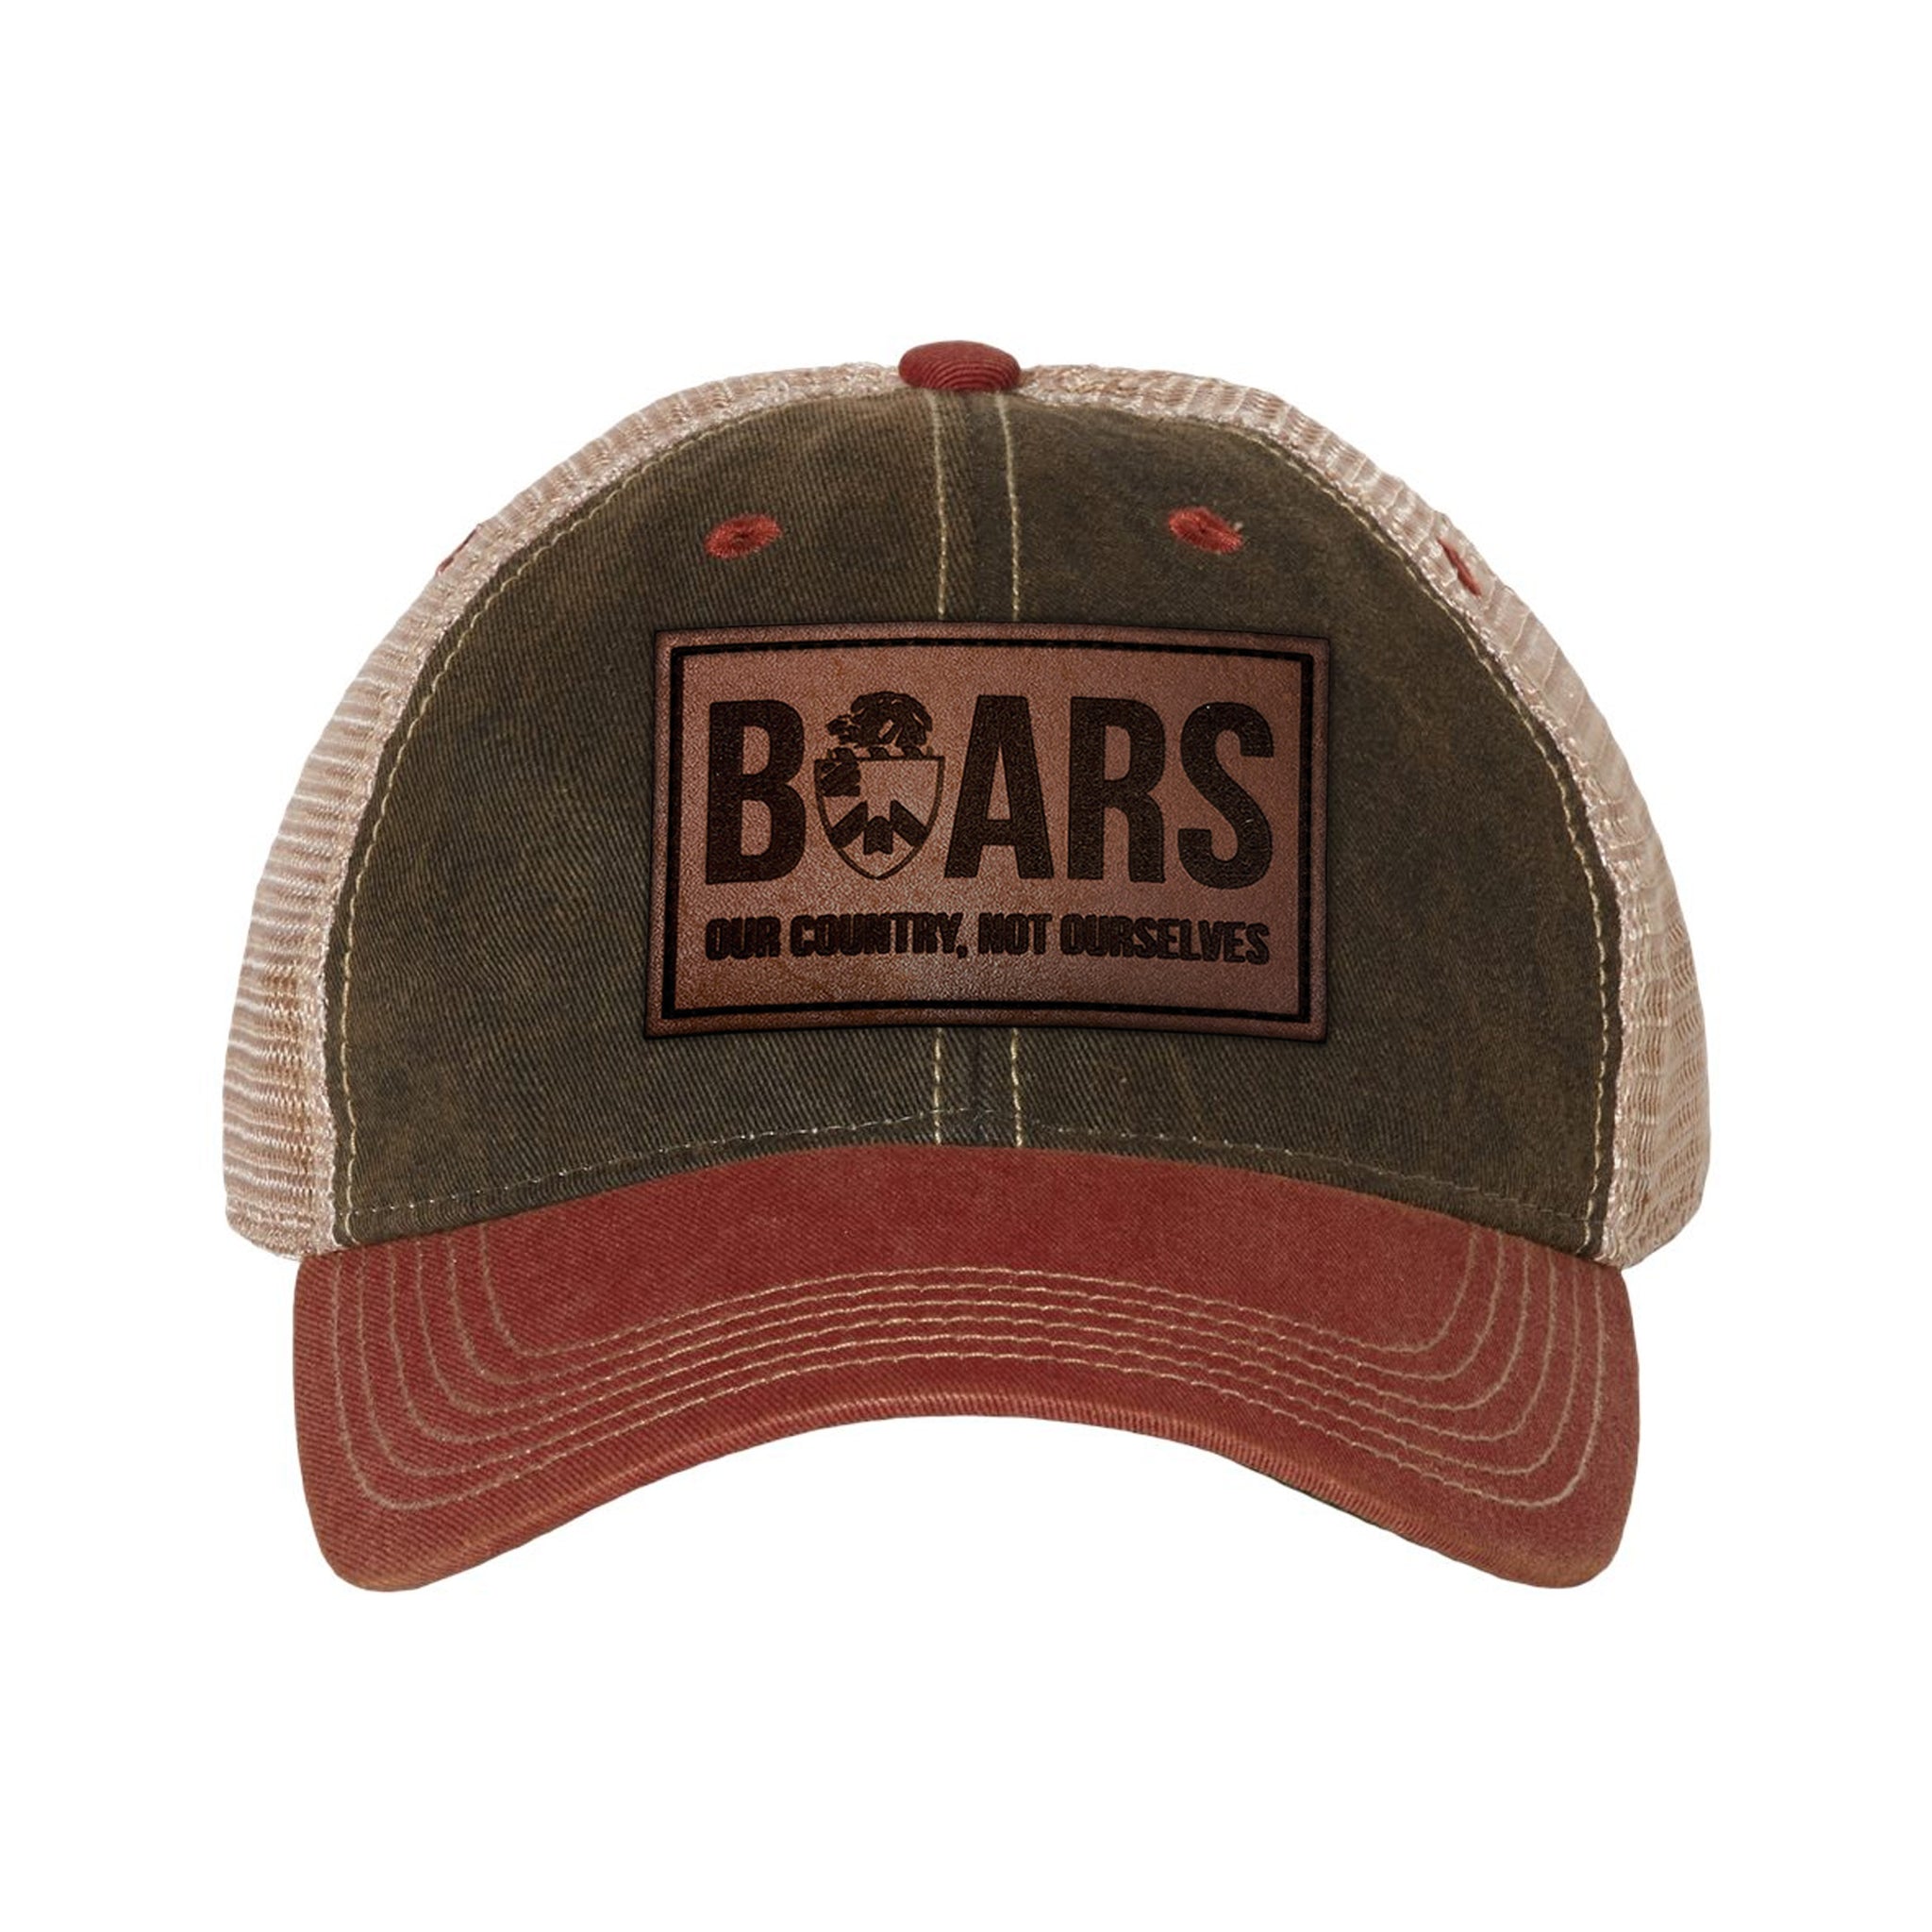 Wild Boars Leather Dad Cap - American Trigger Pullers